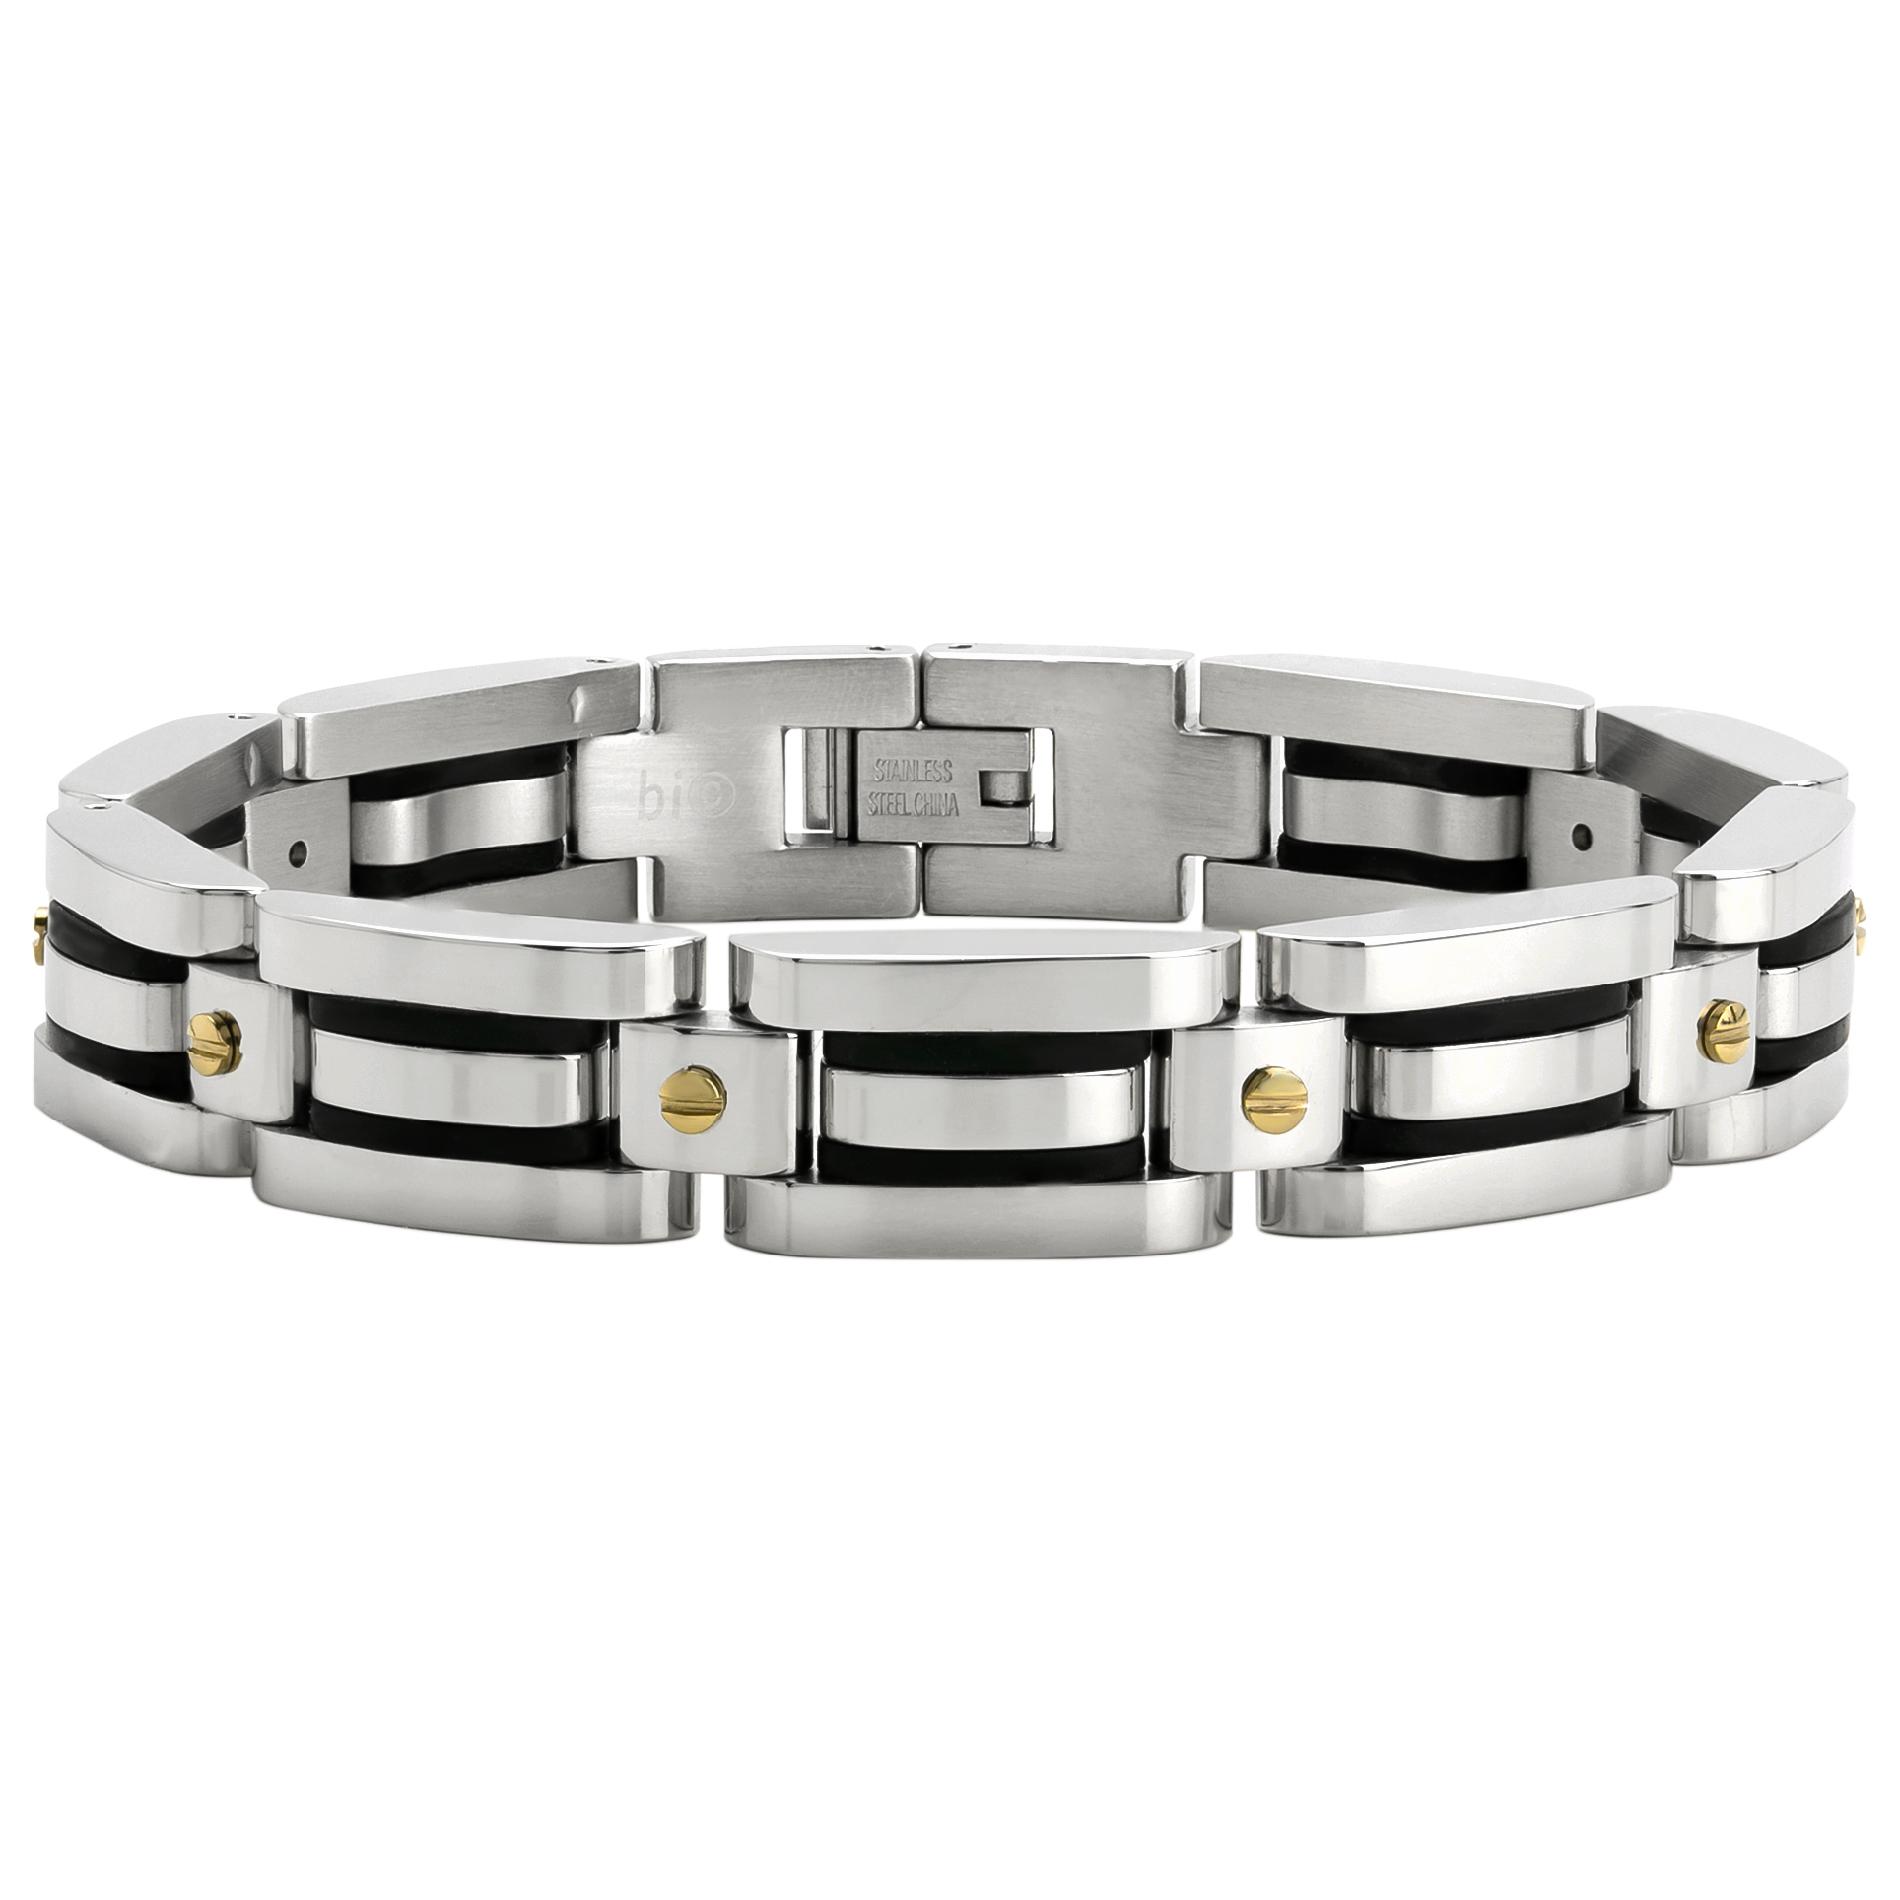 Stainless Steel Link Bracelet with Rubber and Gold IP Screw